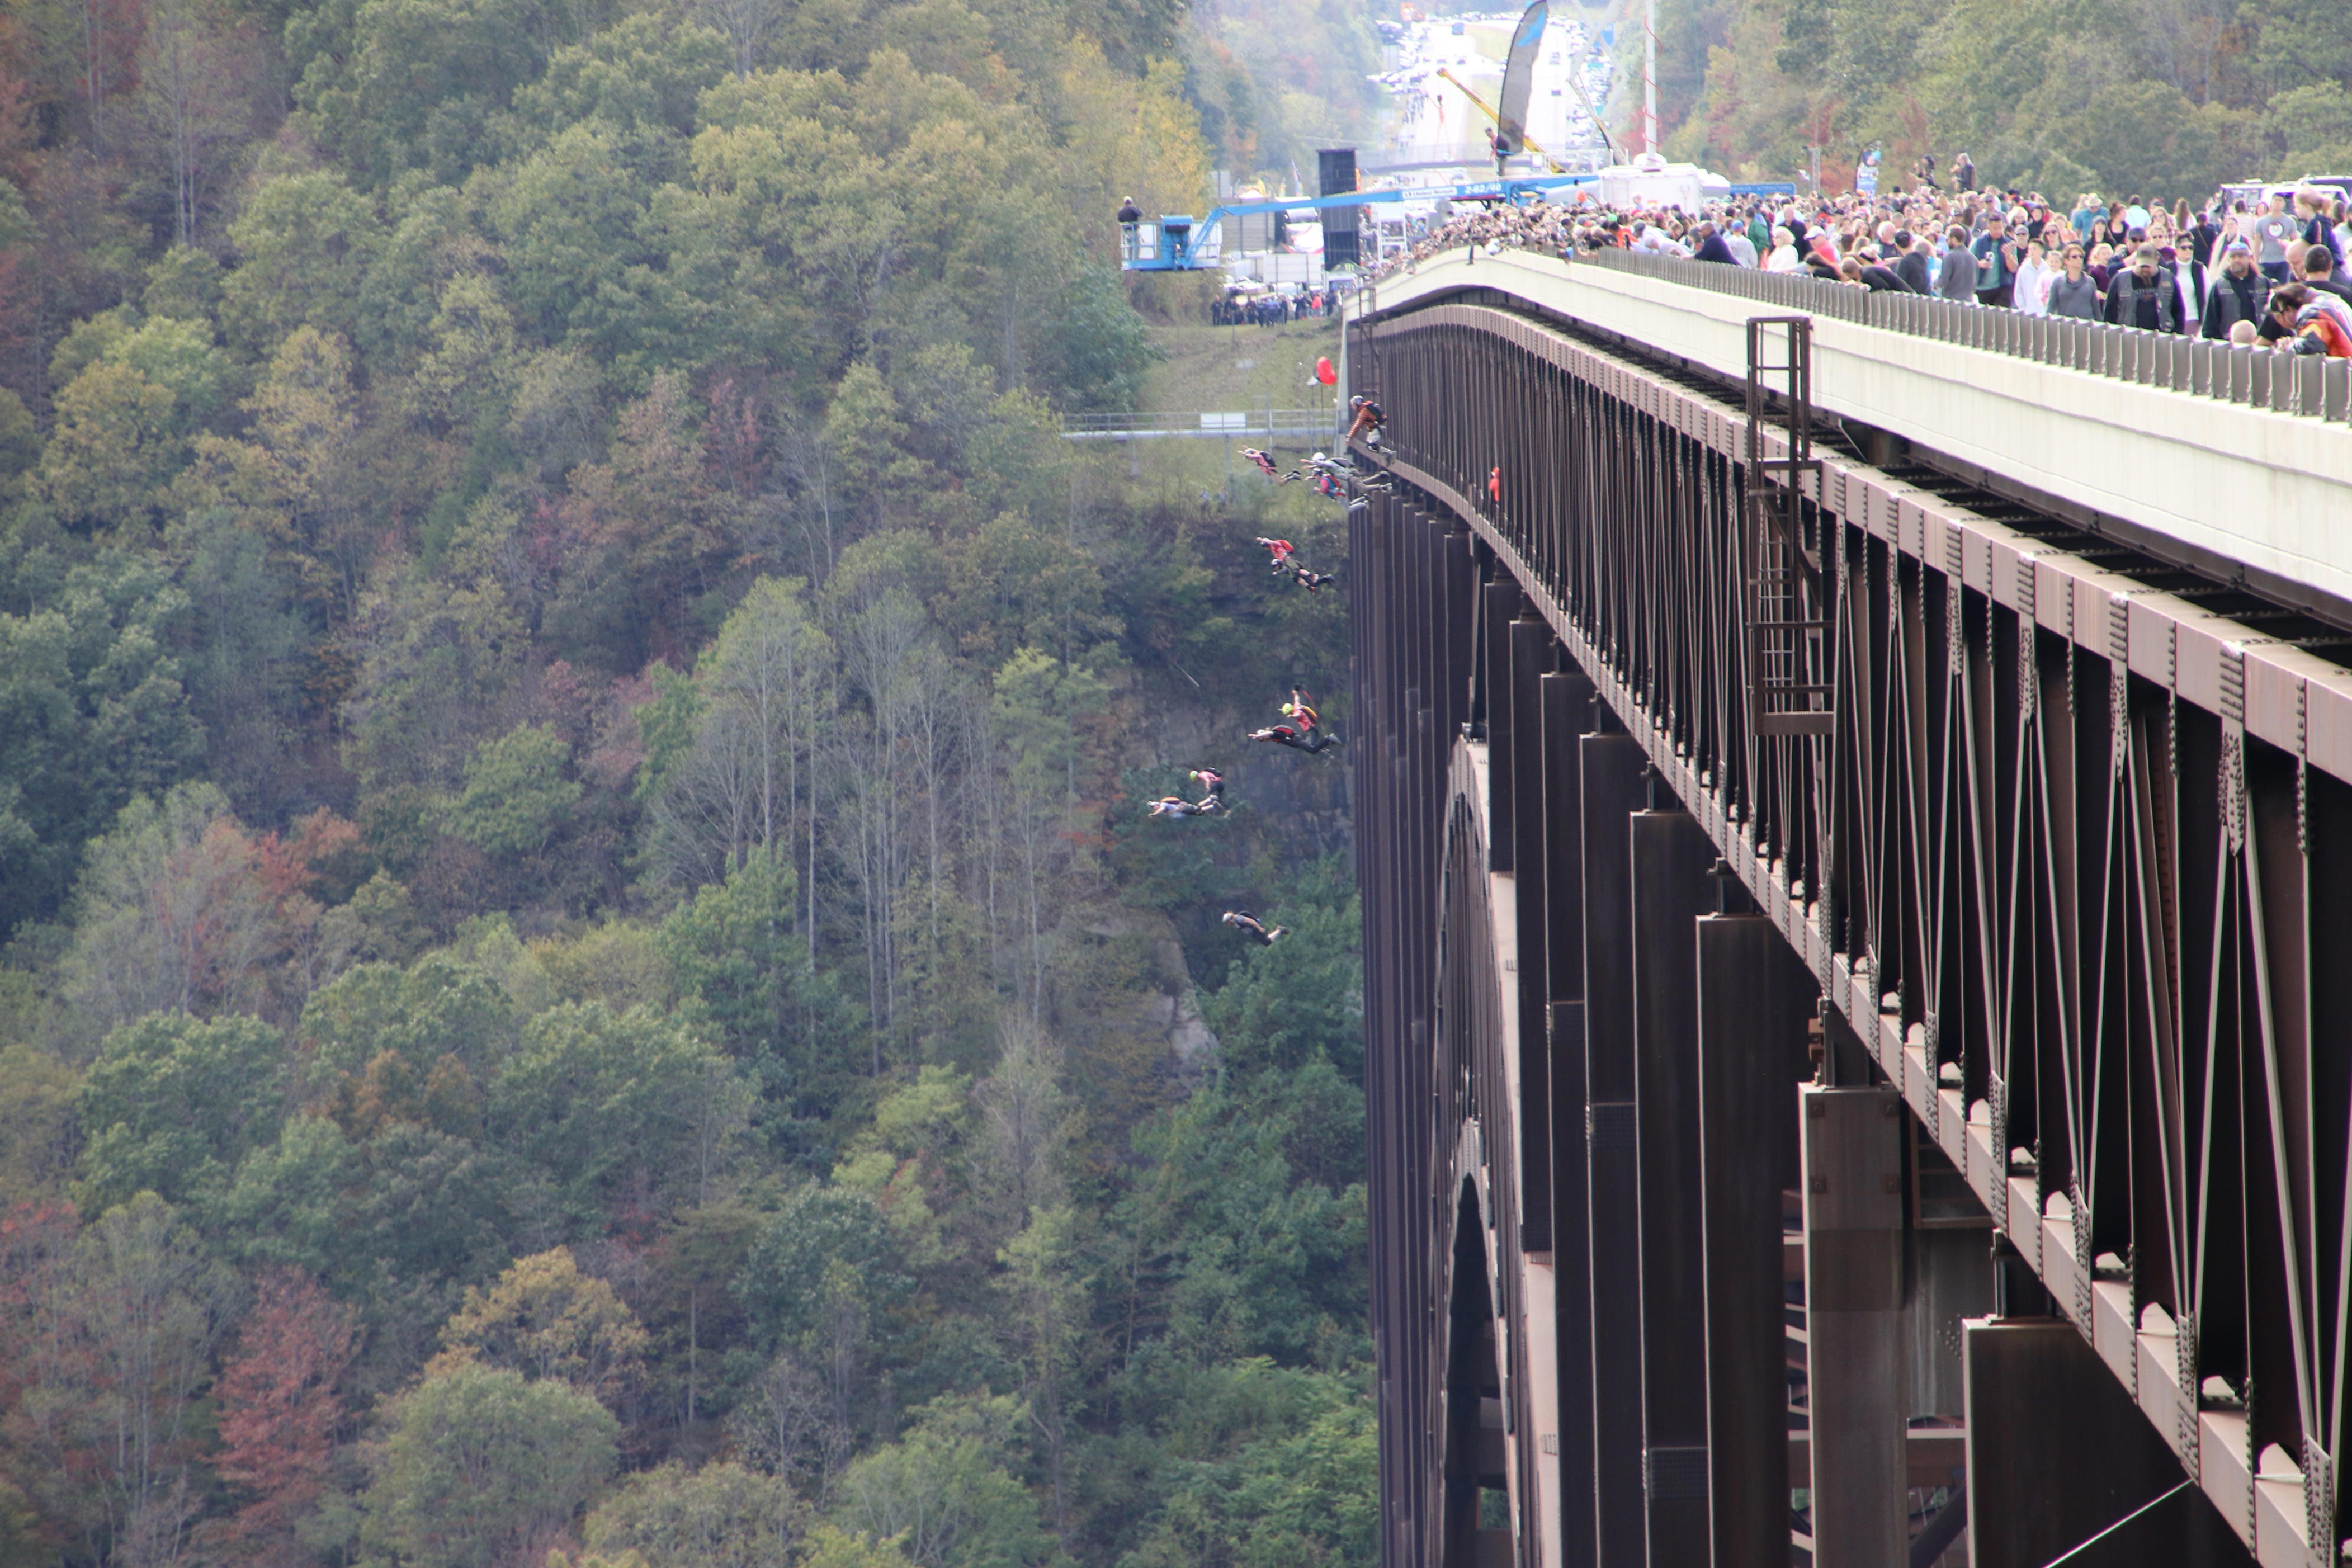 wet and wild or nice and slow, new river gorge national park has something for everyone